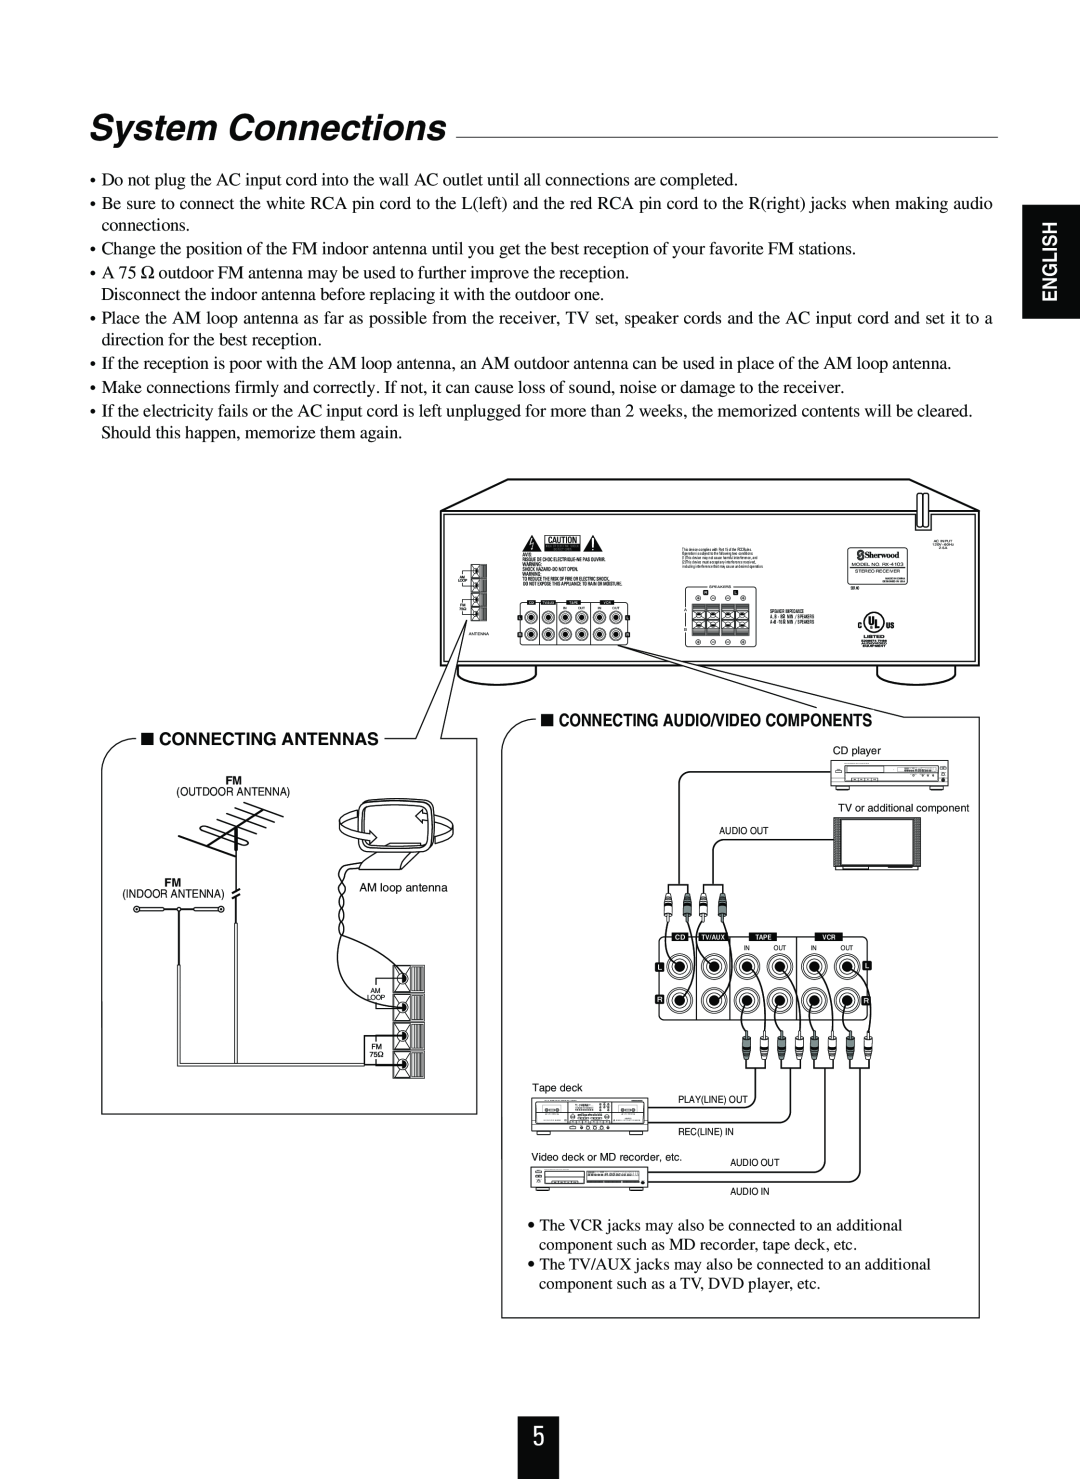 Sherwood RX-4103 manual System Connections, English, Connecting Audio/Video Components, Connecting Antennas 